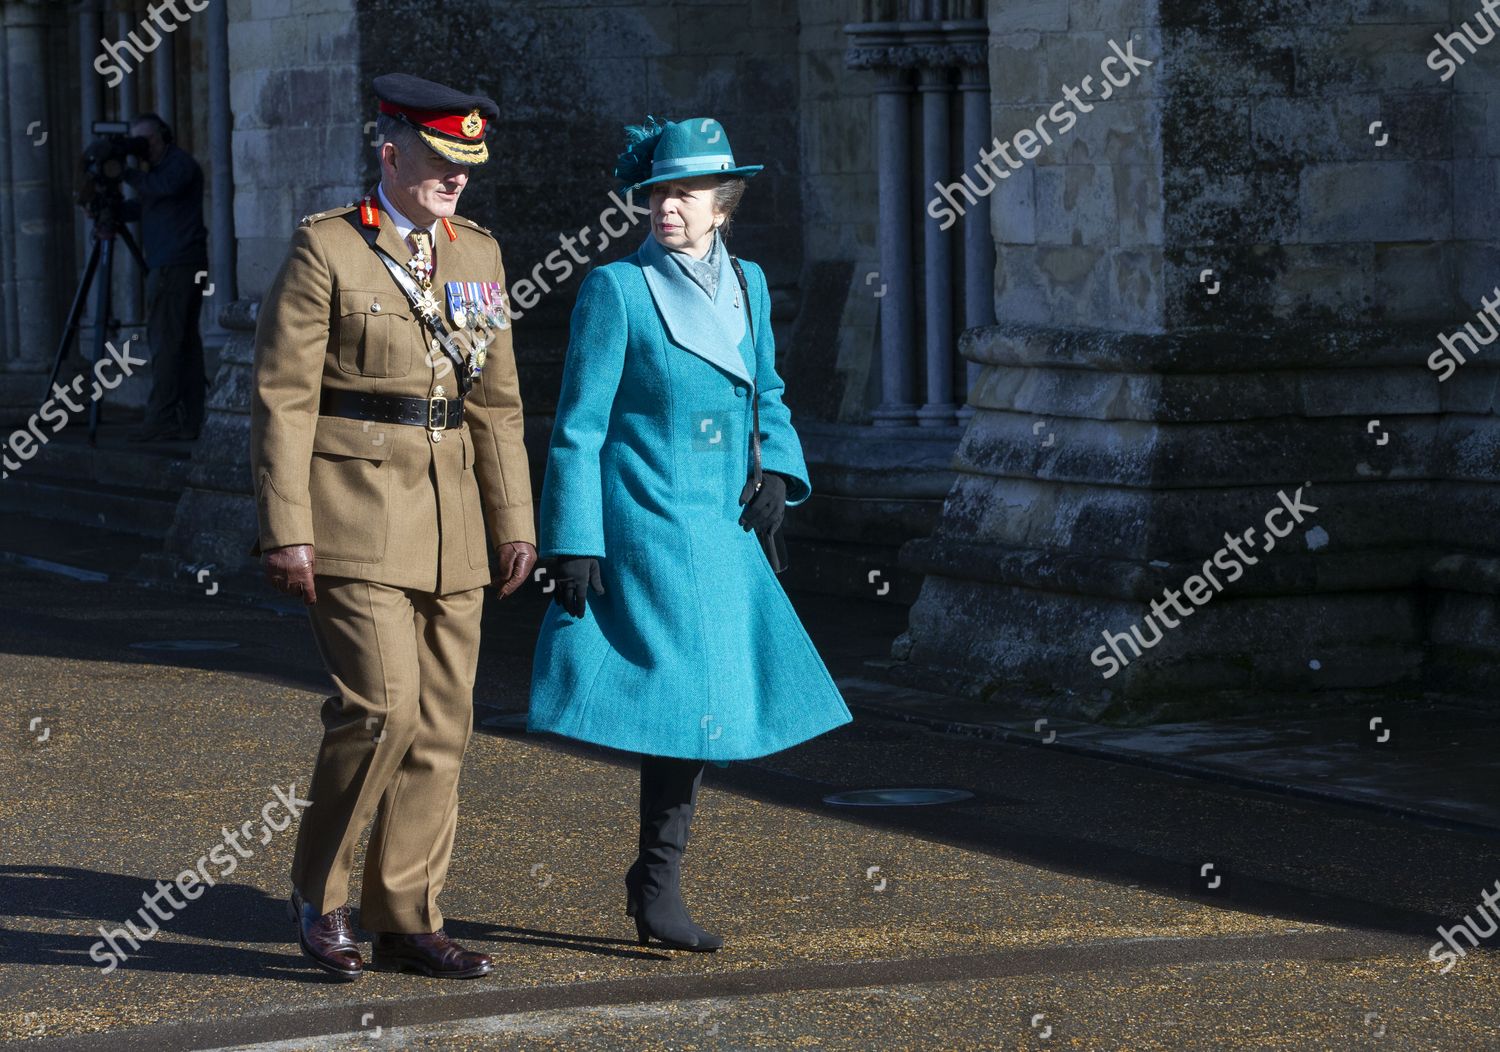 princess-anne-attends-the-royal-corps-of-signals-centenary-service-salisbury-cathedral-wiltshire-uk-shutterstock-editorial-10570519c.jpg